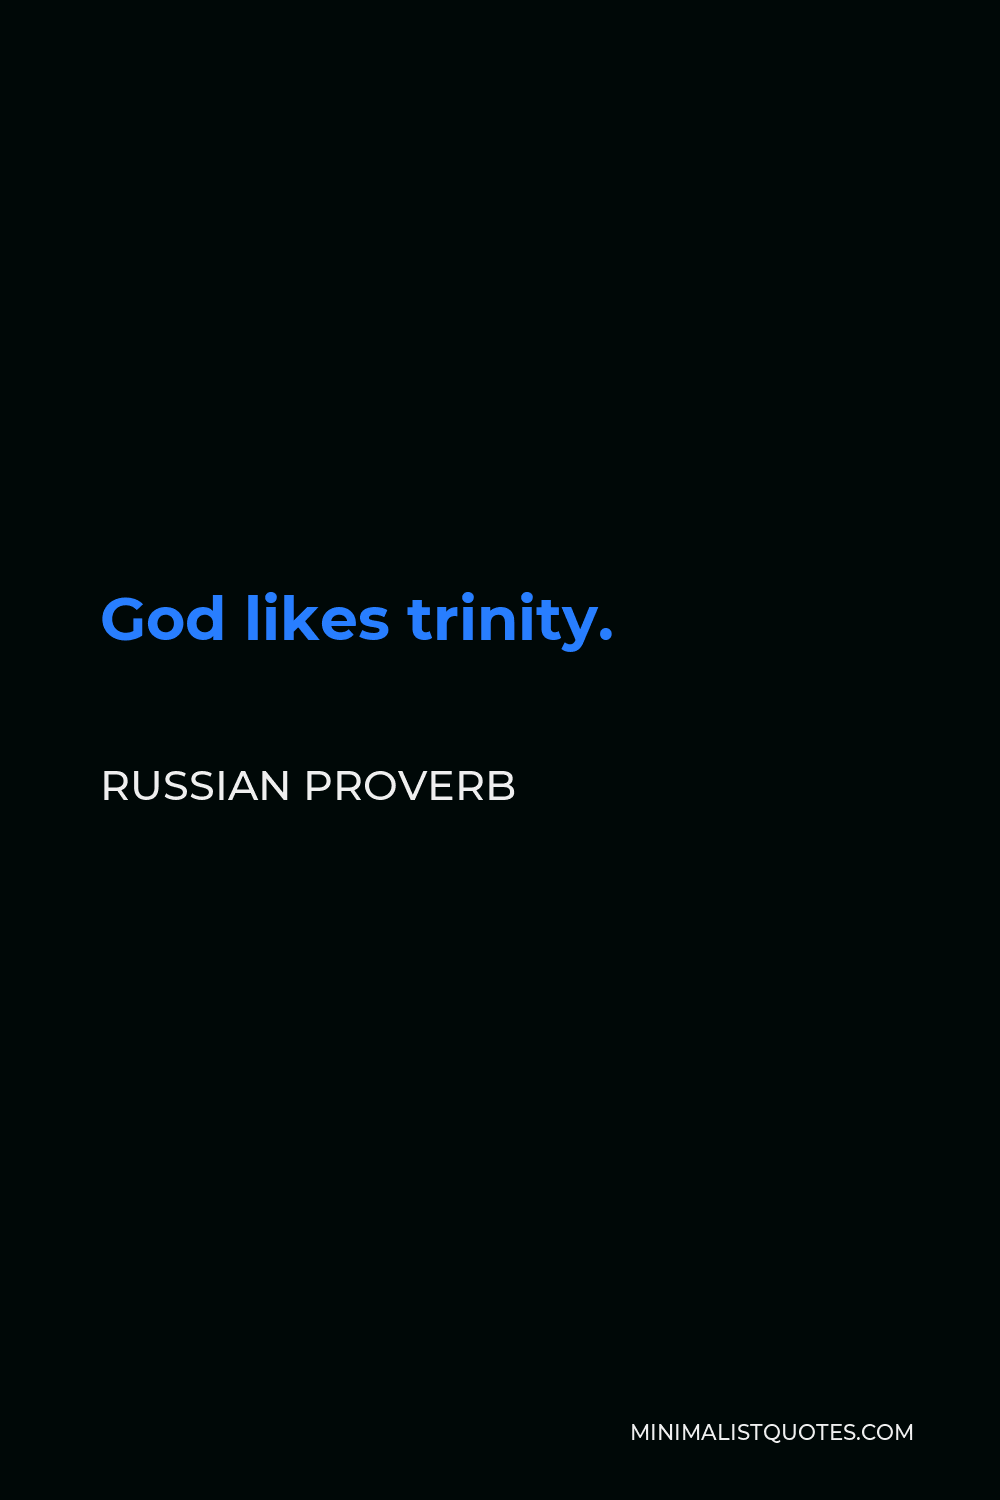 Russian Proverb Quote - God likes trinity.